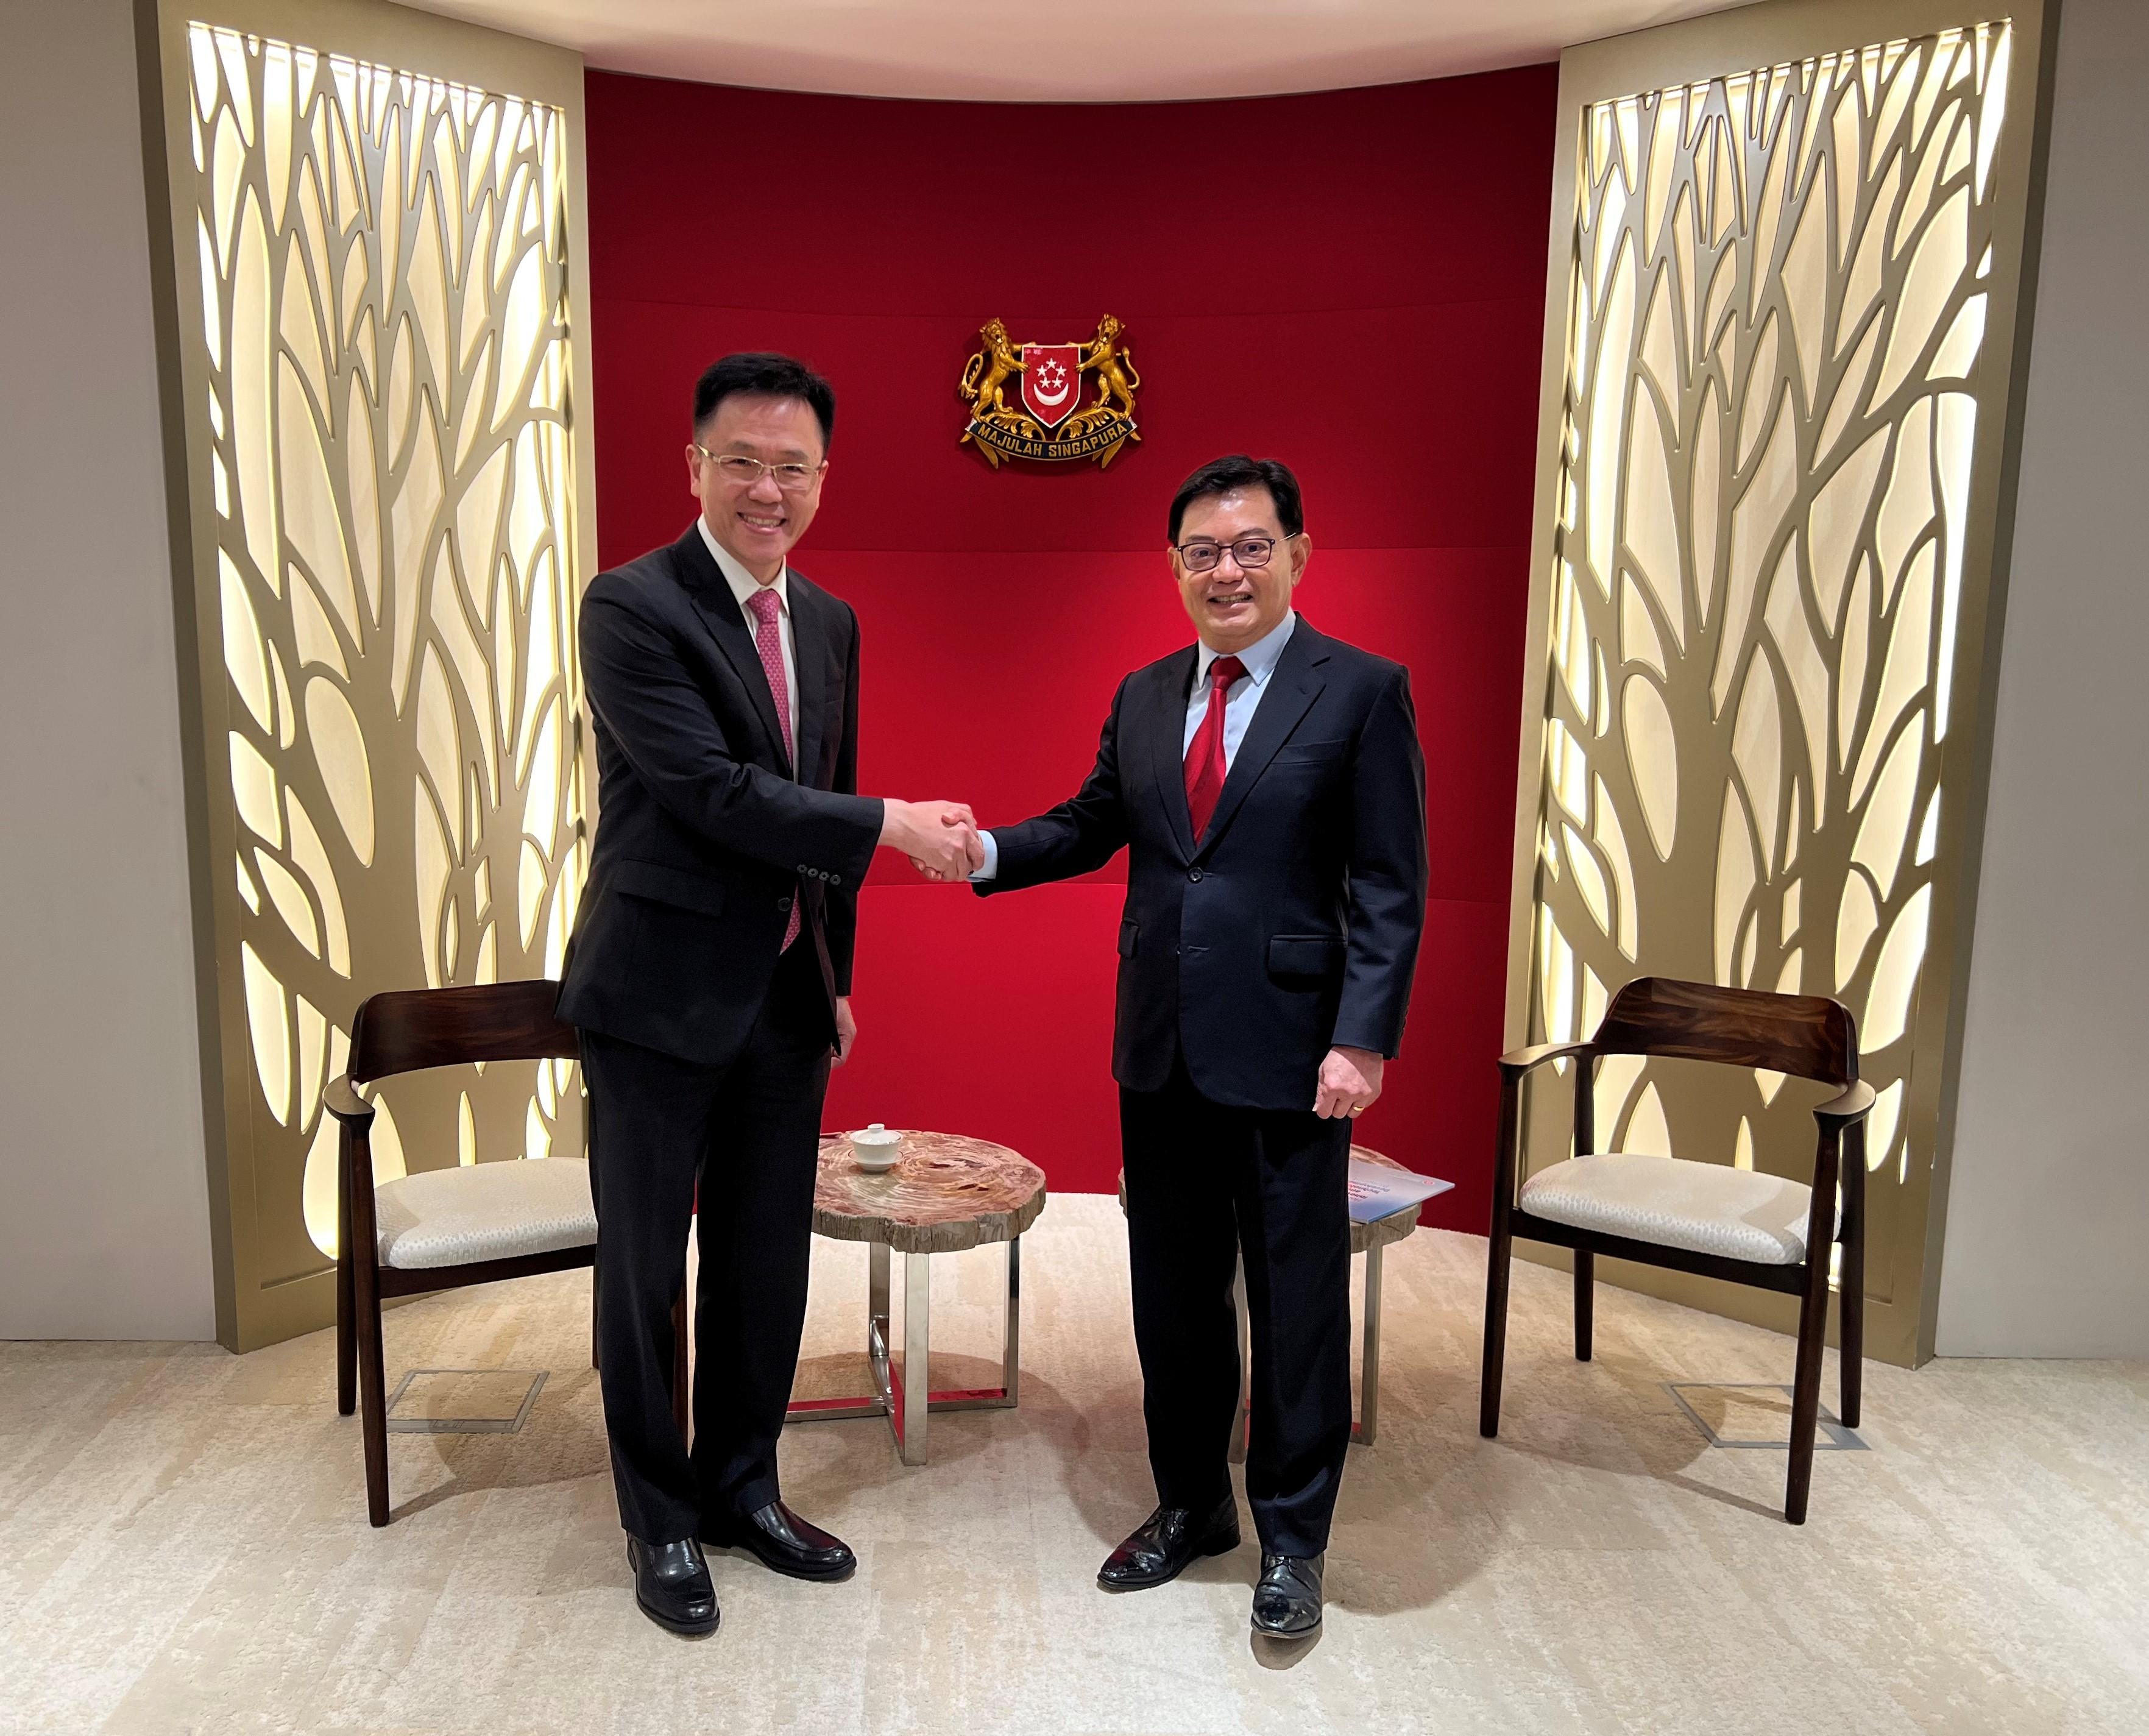 The Secretary for Innovation, Technology and Industry, Professor Sun Dong (left), pays a courtesy call on the Deputy Prime Minister and Coordinating Minister for Economic Policies of Singapore, Mr Heng Swee Keat (right), in Singapore today (May 23).